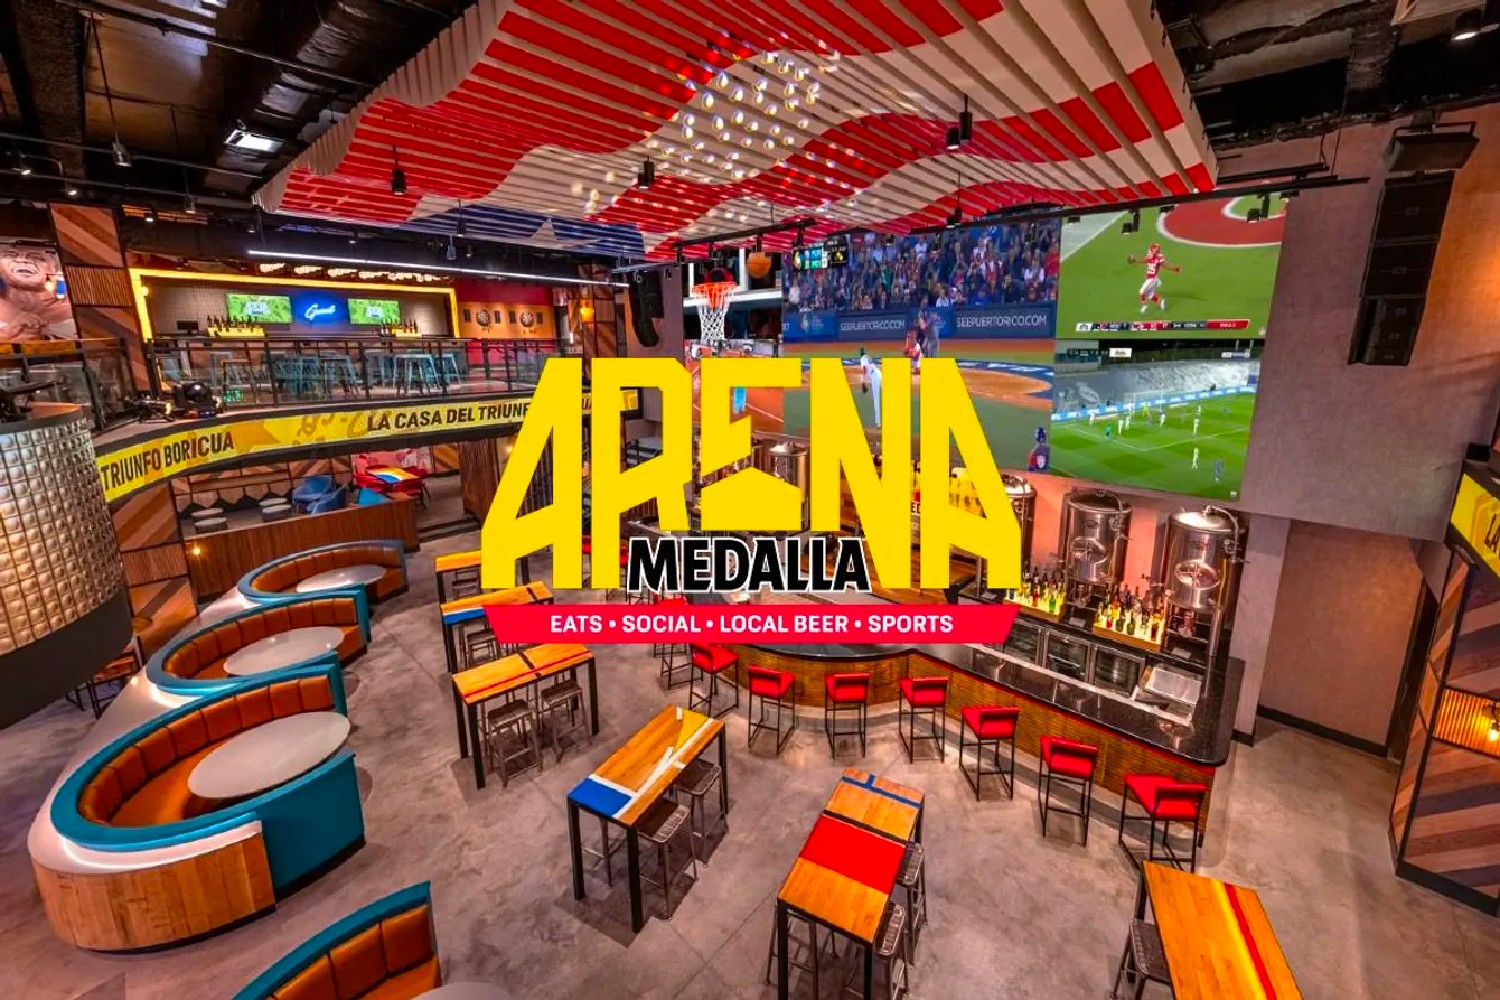 aerial view of the Arena Medalla bar.